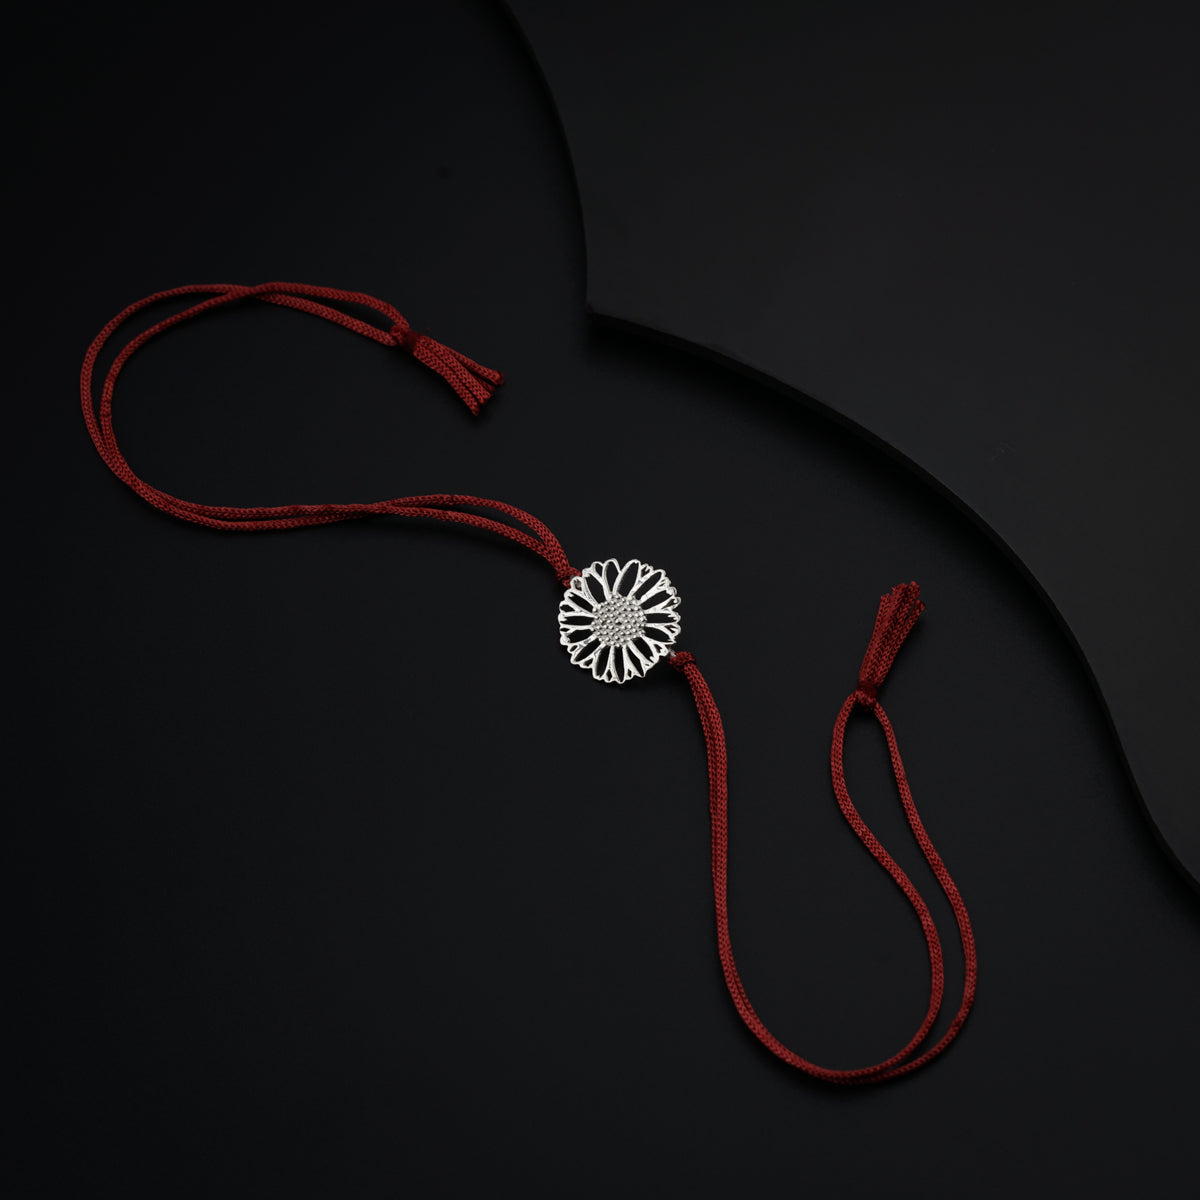 a red string with a brooch hanging from it